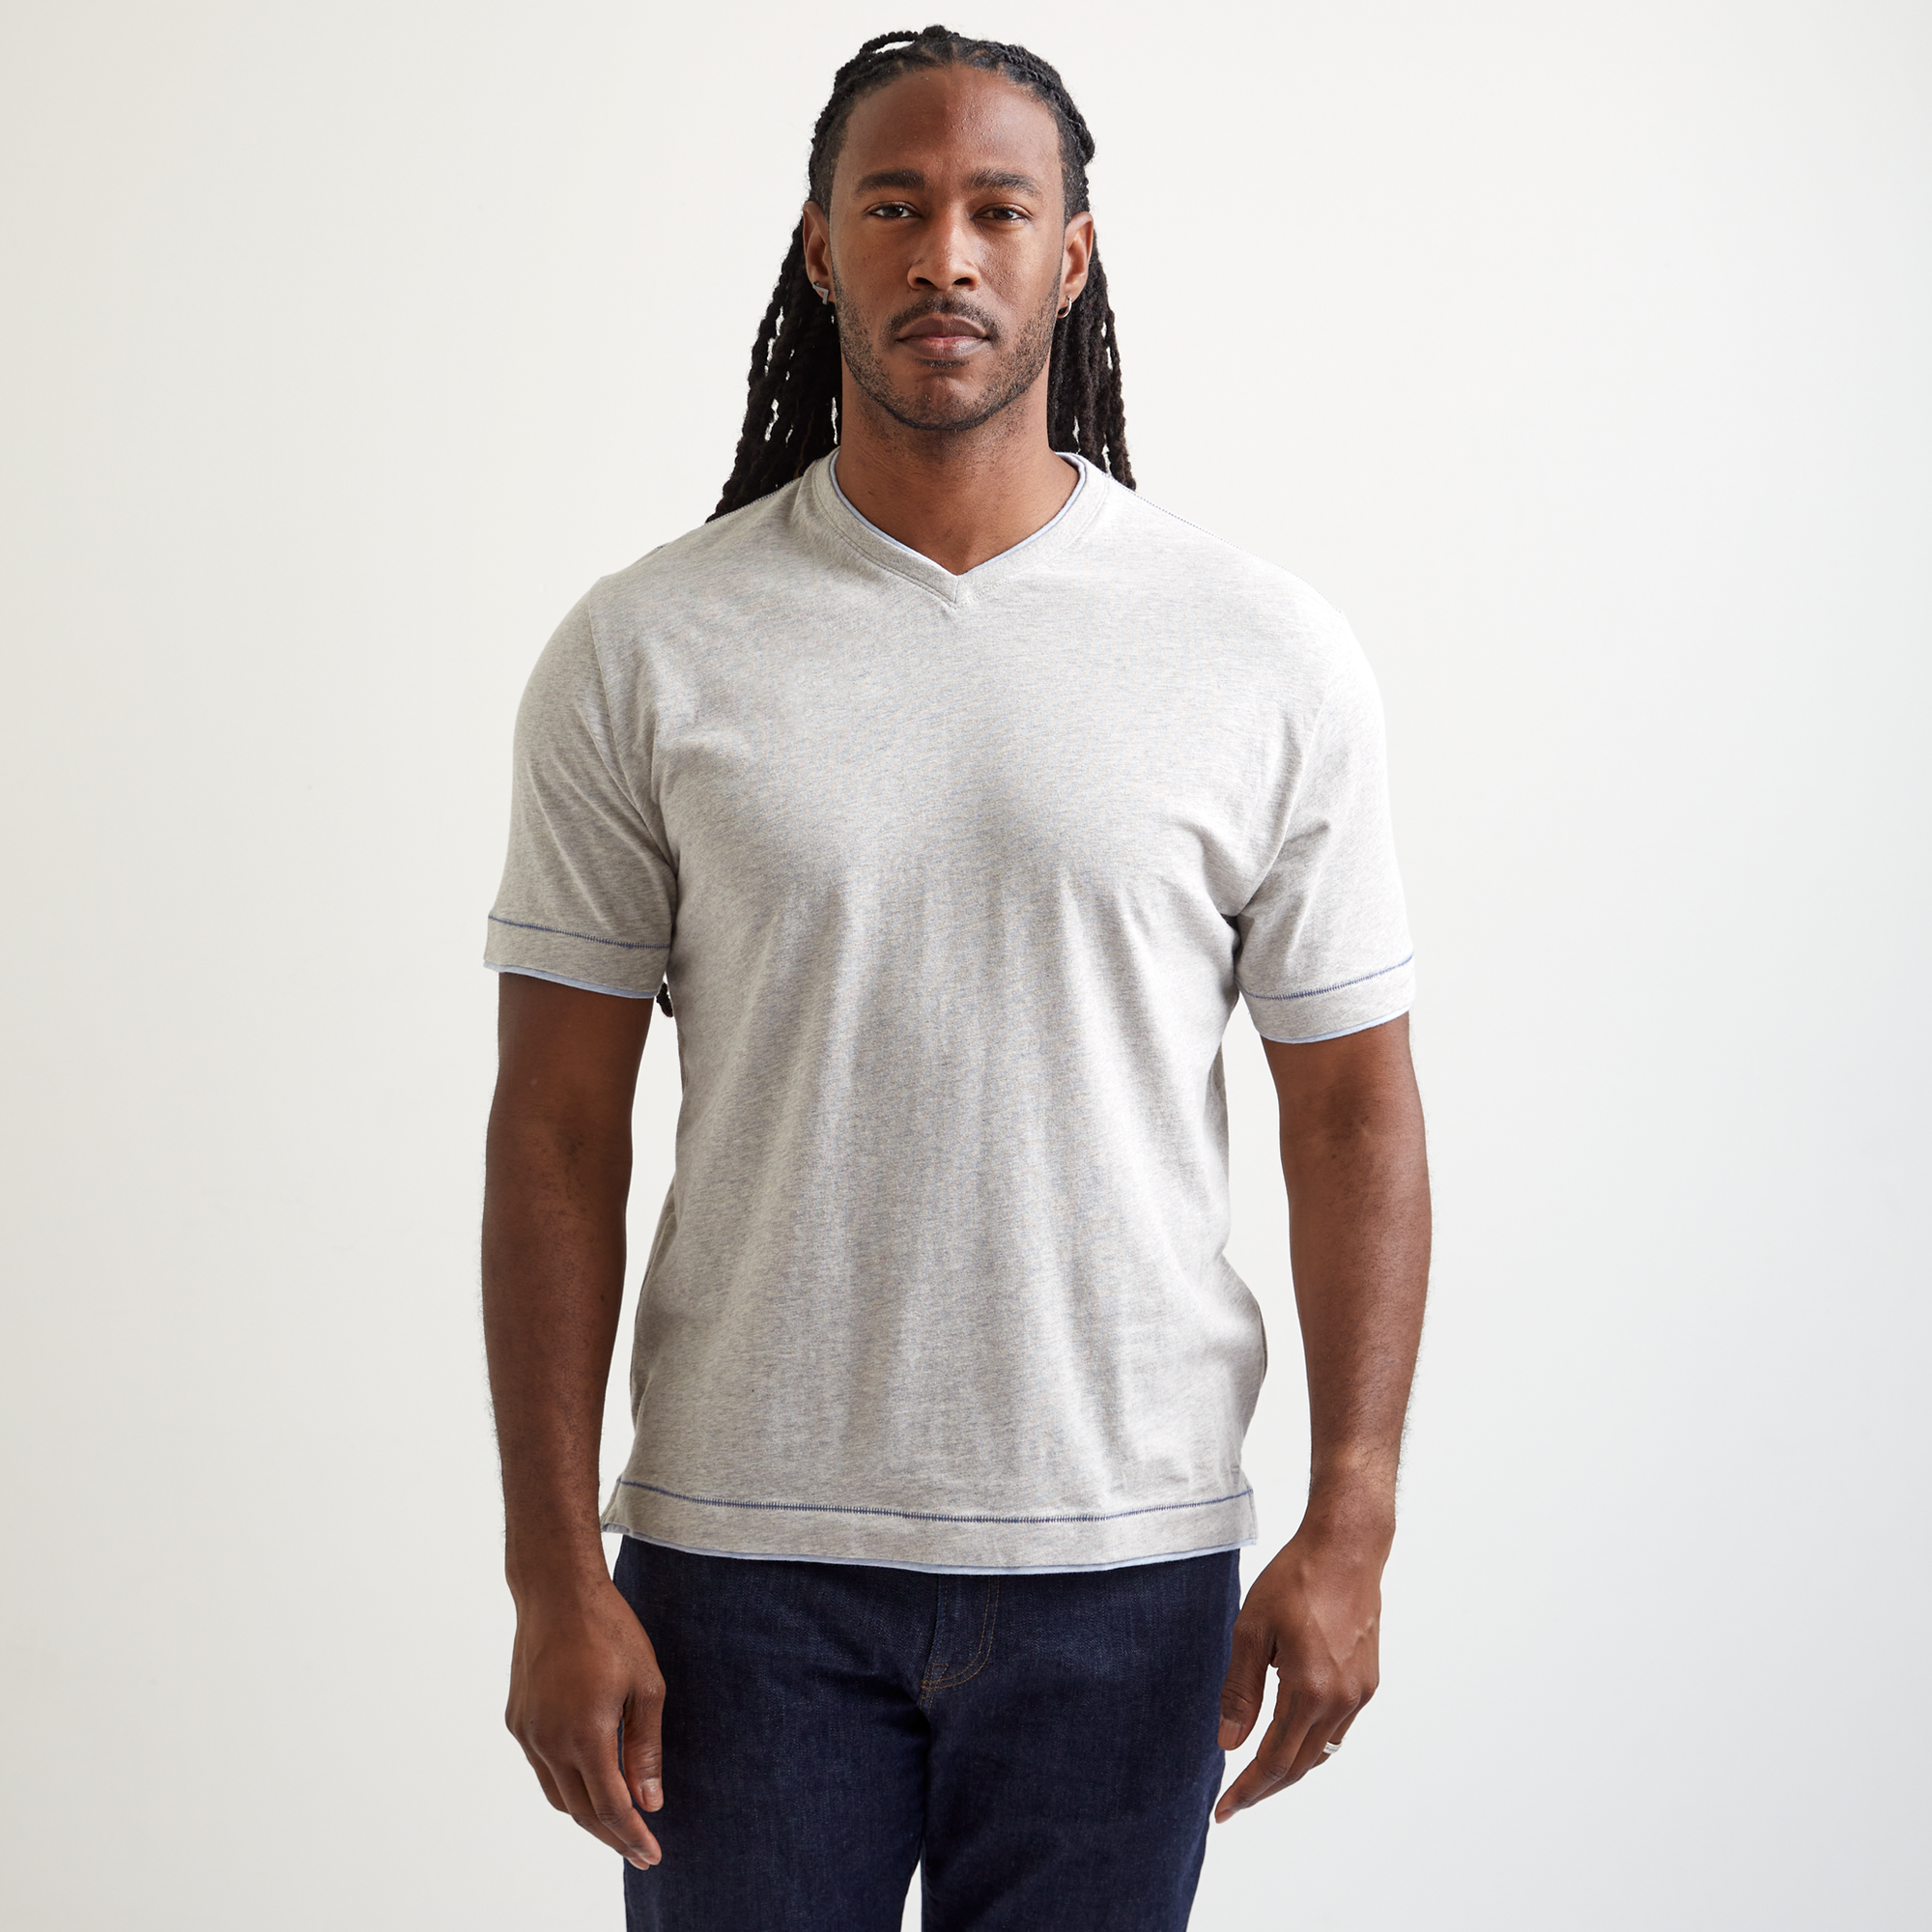 County Line Layered Effect High V-Neck Tee Shirt in Pearl Mélange by Left Coast Tee